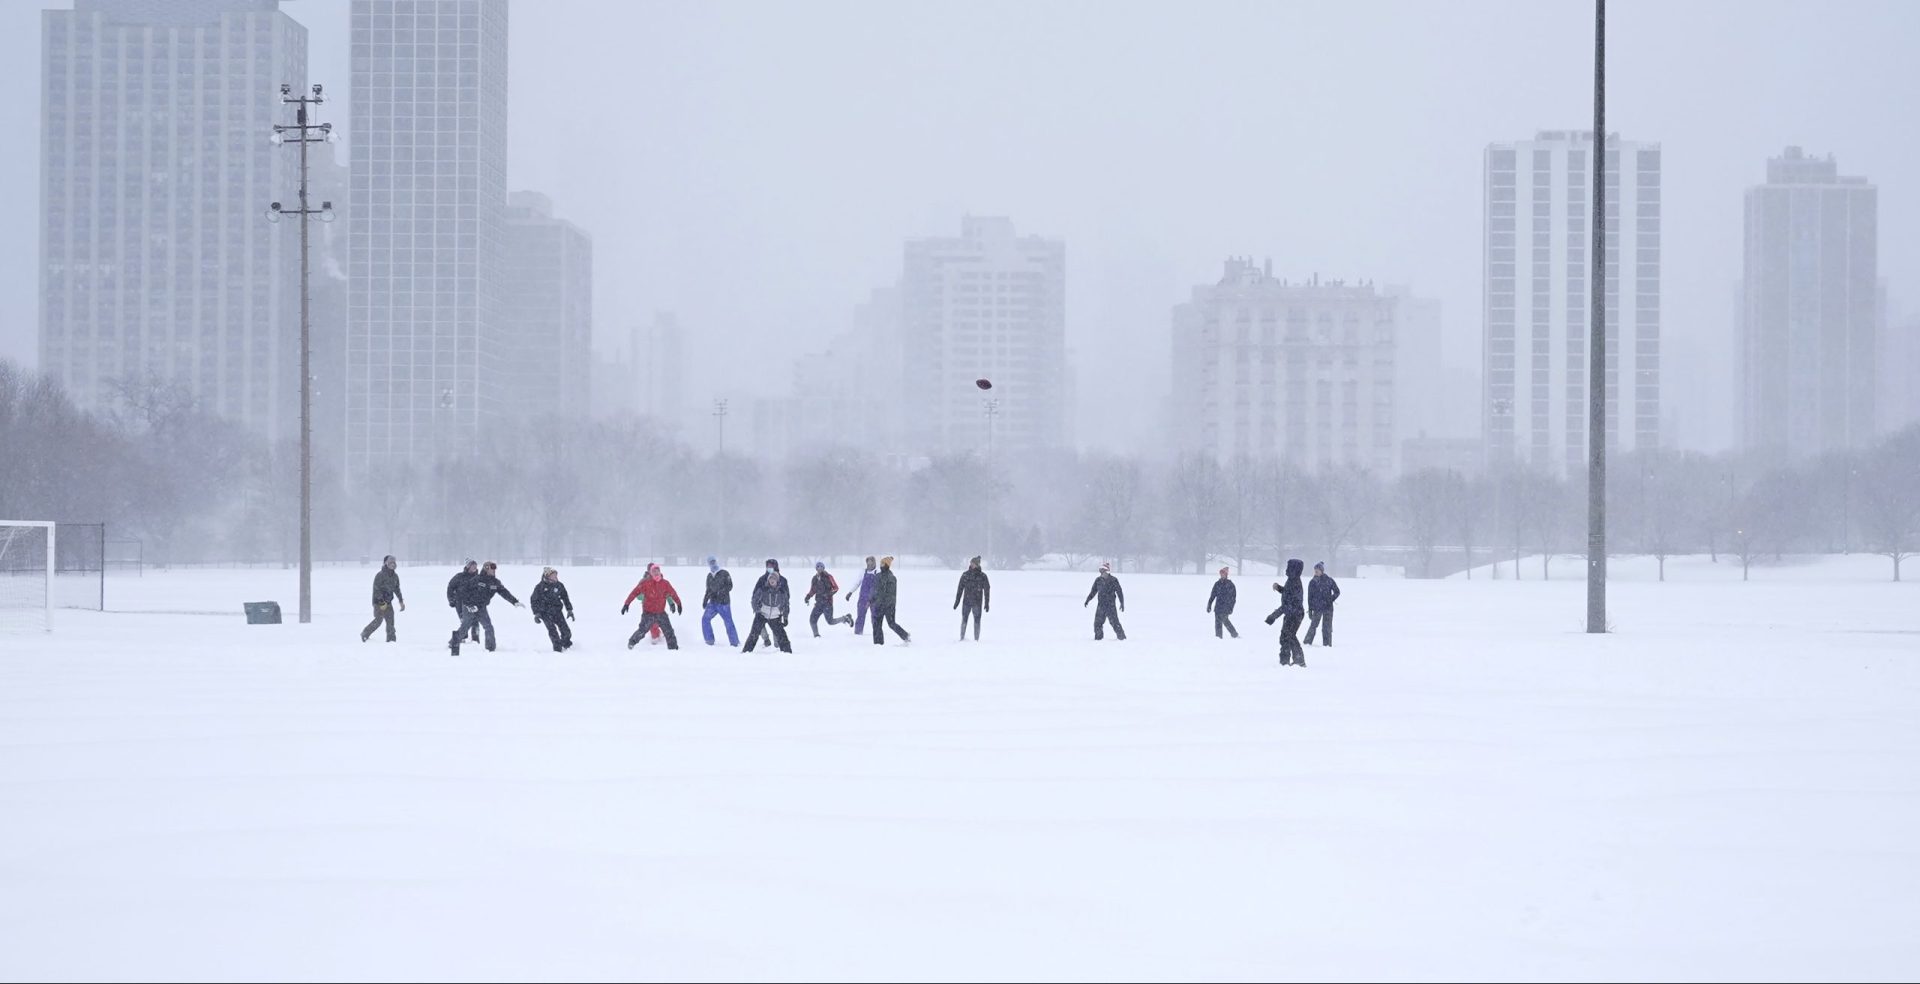 Men play football on a soccer field in Chicago's Lincoln Park Wednesday, Feb. 2, 2022. A major winter storm with millions of Americans in its path brought a mix of rain, freezing rain and snow to the middle section of the United States as airlines canceled hundreds of flights, governors urged residents to stay off roads and schools closed campuses.